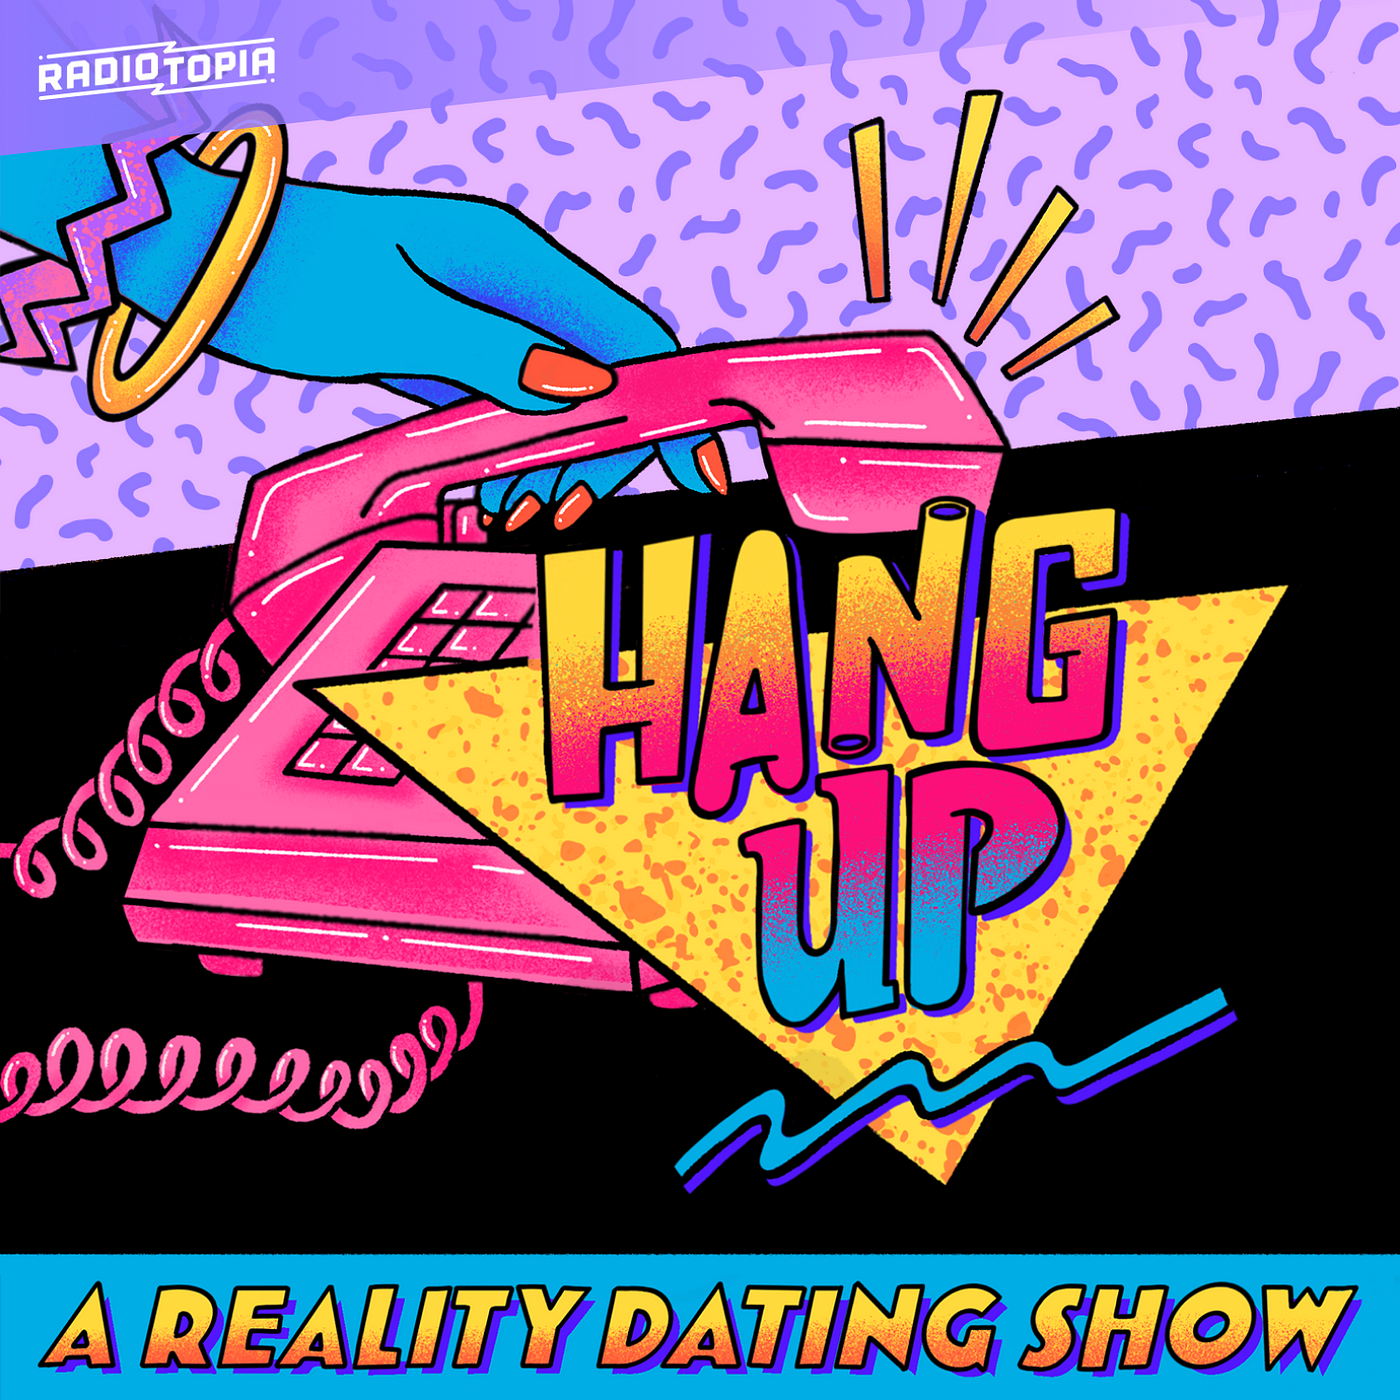 Radiotopia from PRX Introduces “Hang Up,” A New Reality Dating Podcast by PRX PRX Official Medium pic